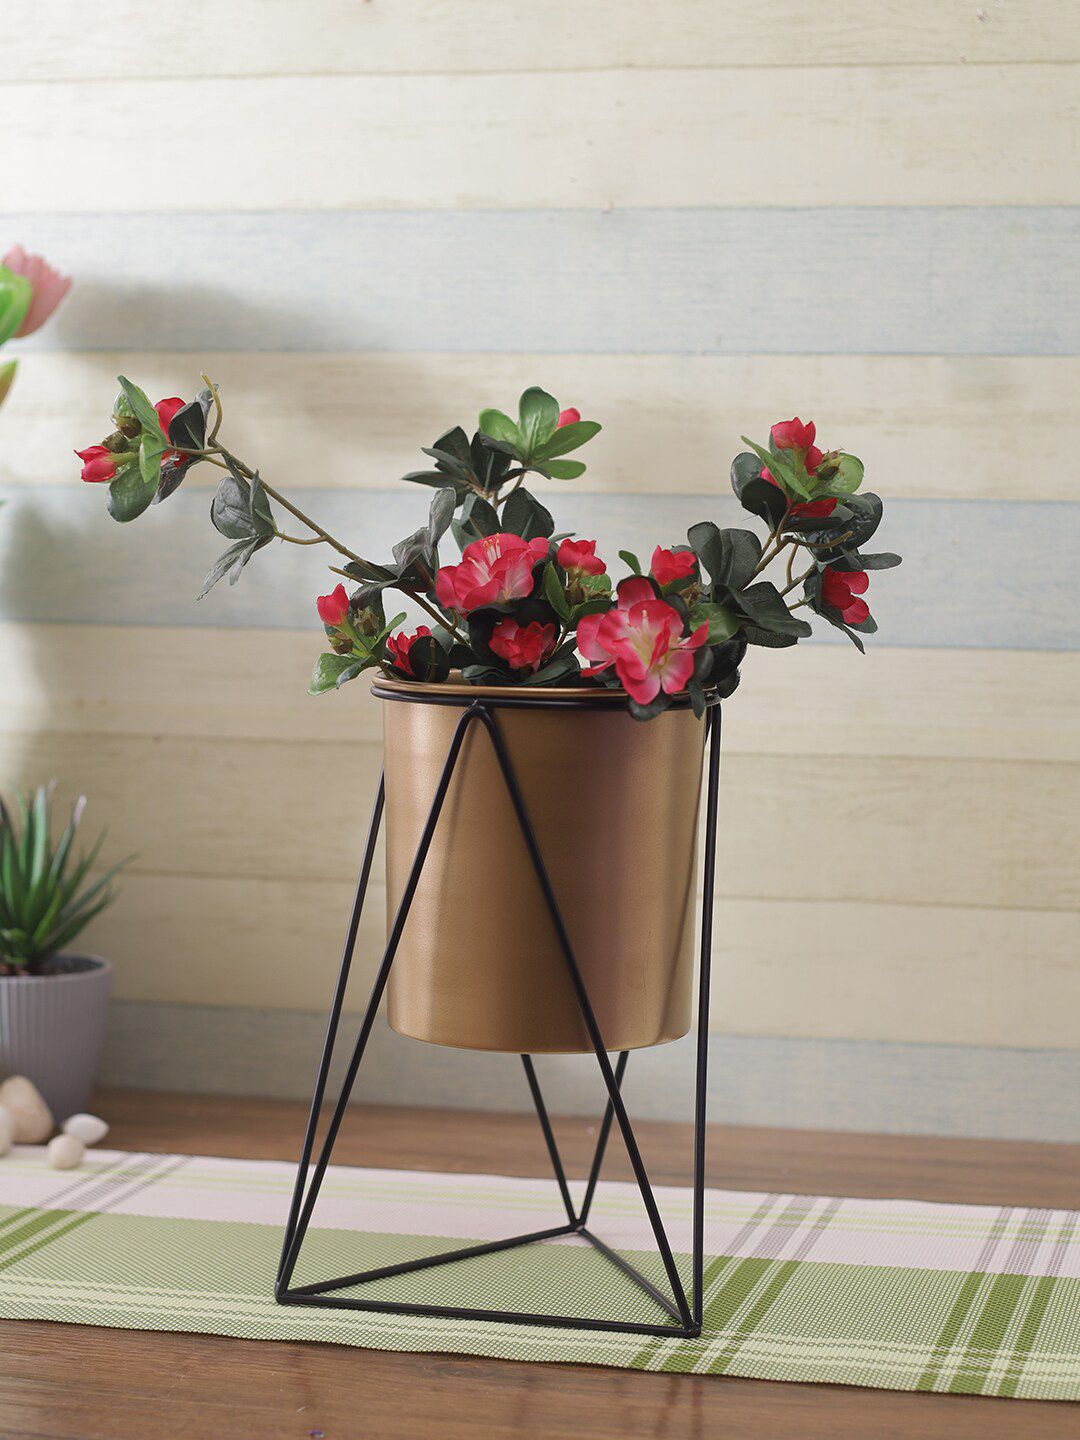 Aapno Rajasthan Copper-Toned & Black Solid Metal Planters With Triangular Stand Price in India